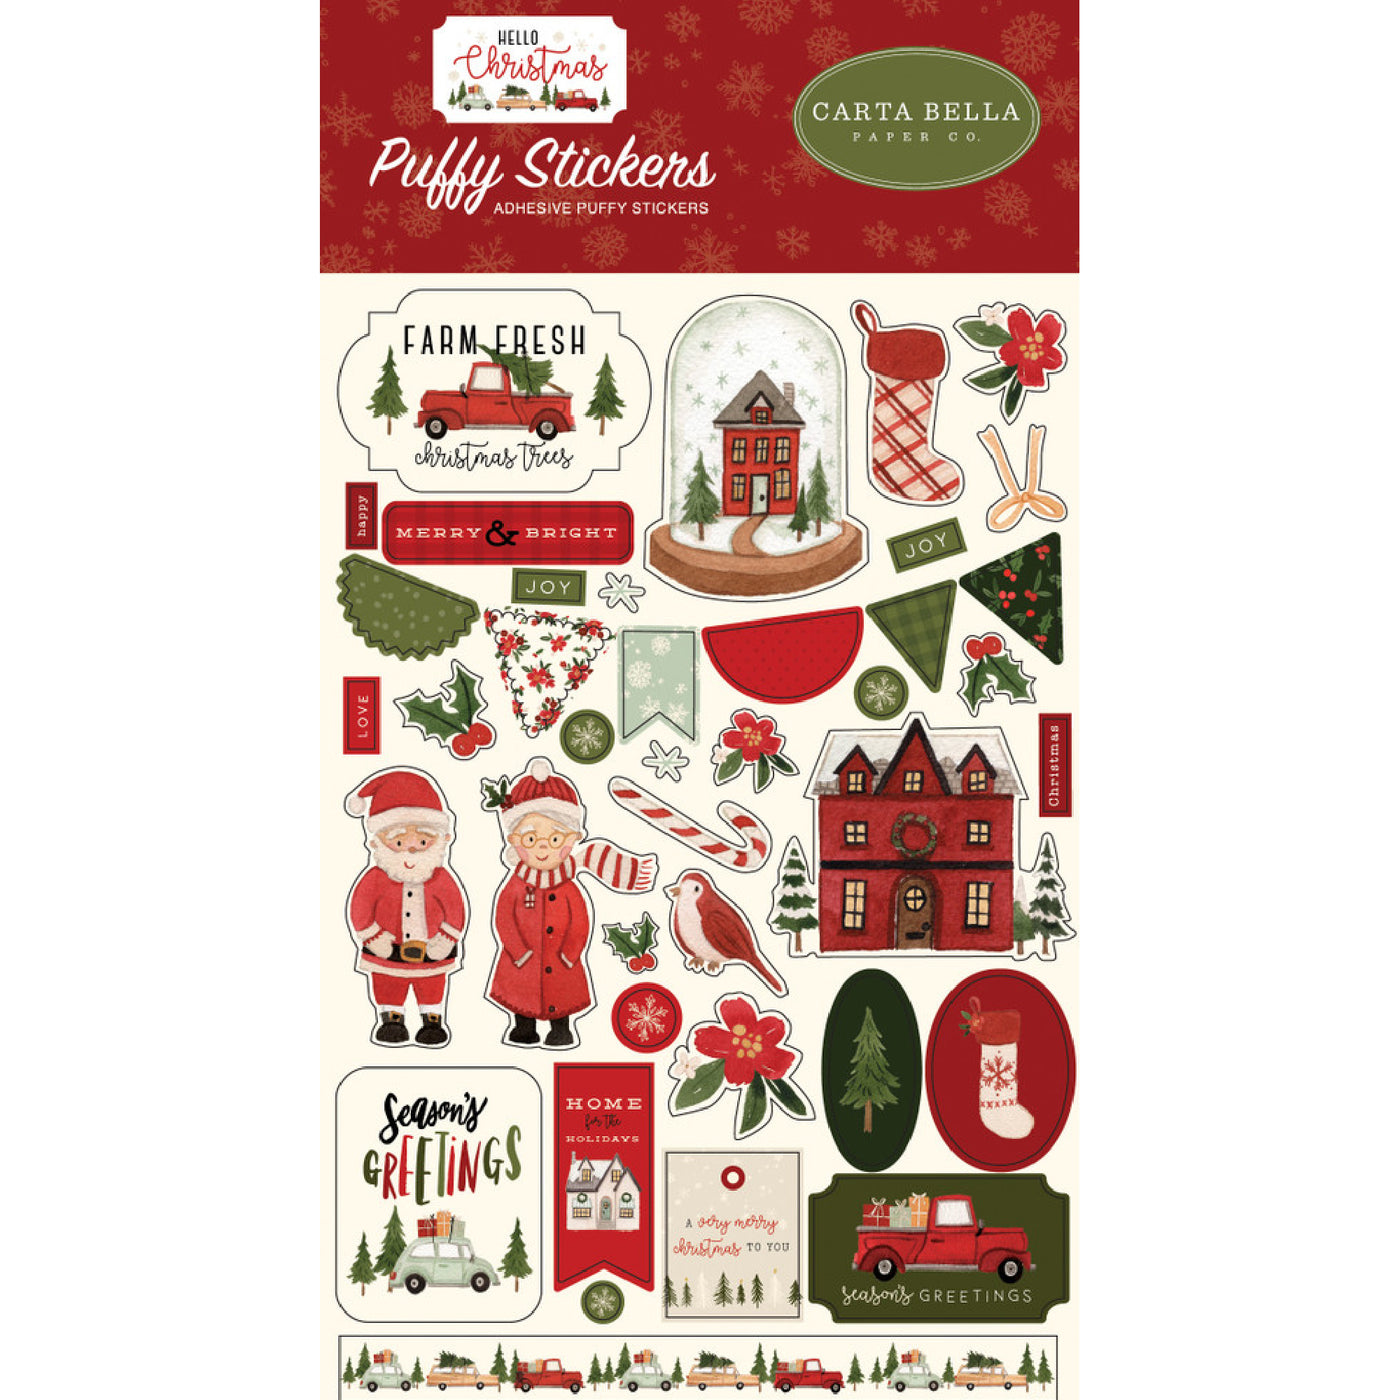 39 Puffy Stickers in various shapes and sizes; adhesive back, designed to coordinate with Hello Christmas Collection by Carta Bella.